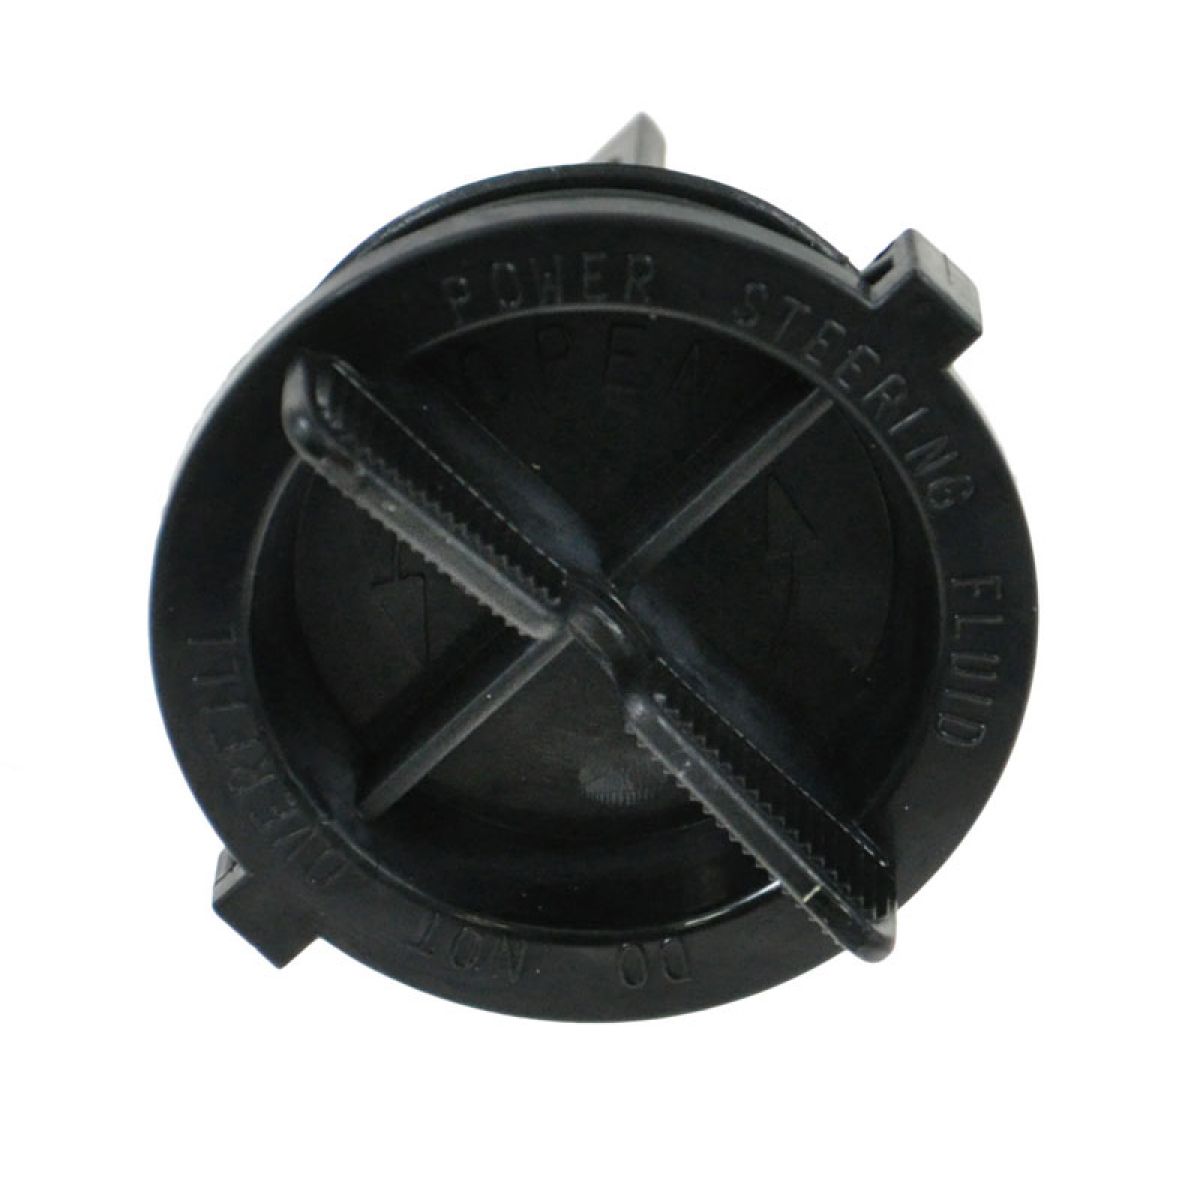 Details About Power Steering Pump Cap For Ford Bronco Ltd F150 F250 F350 Pickup Truck Mustang